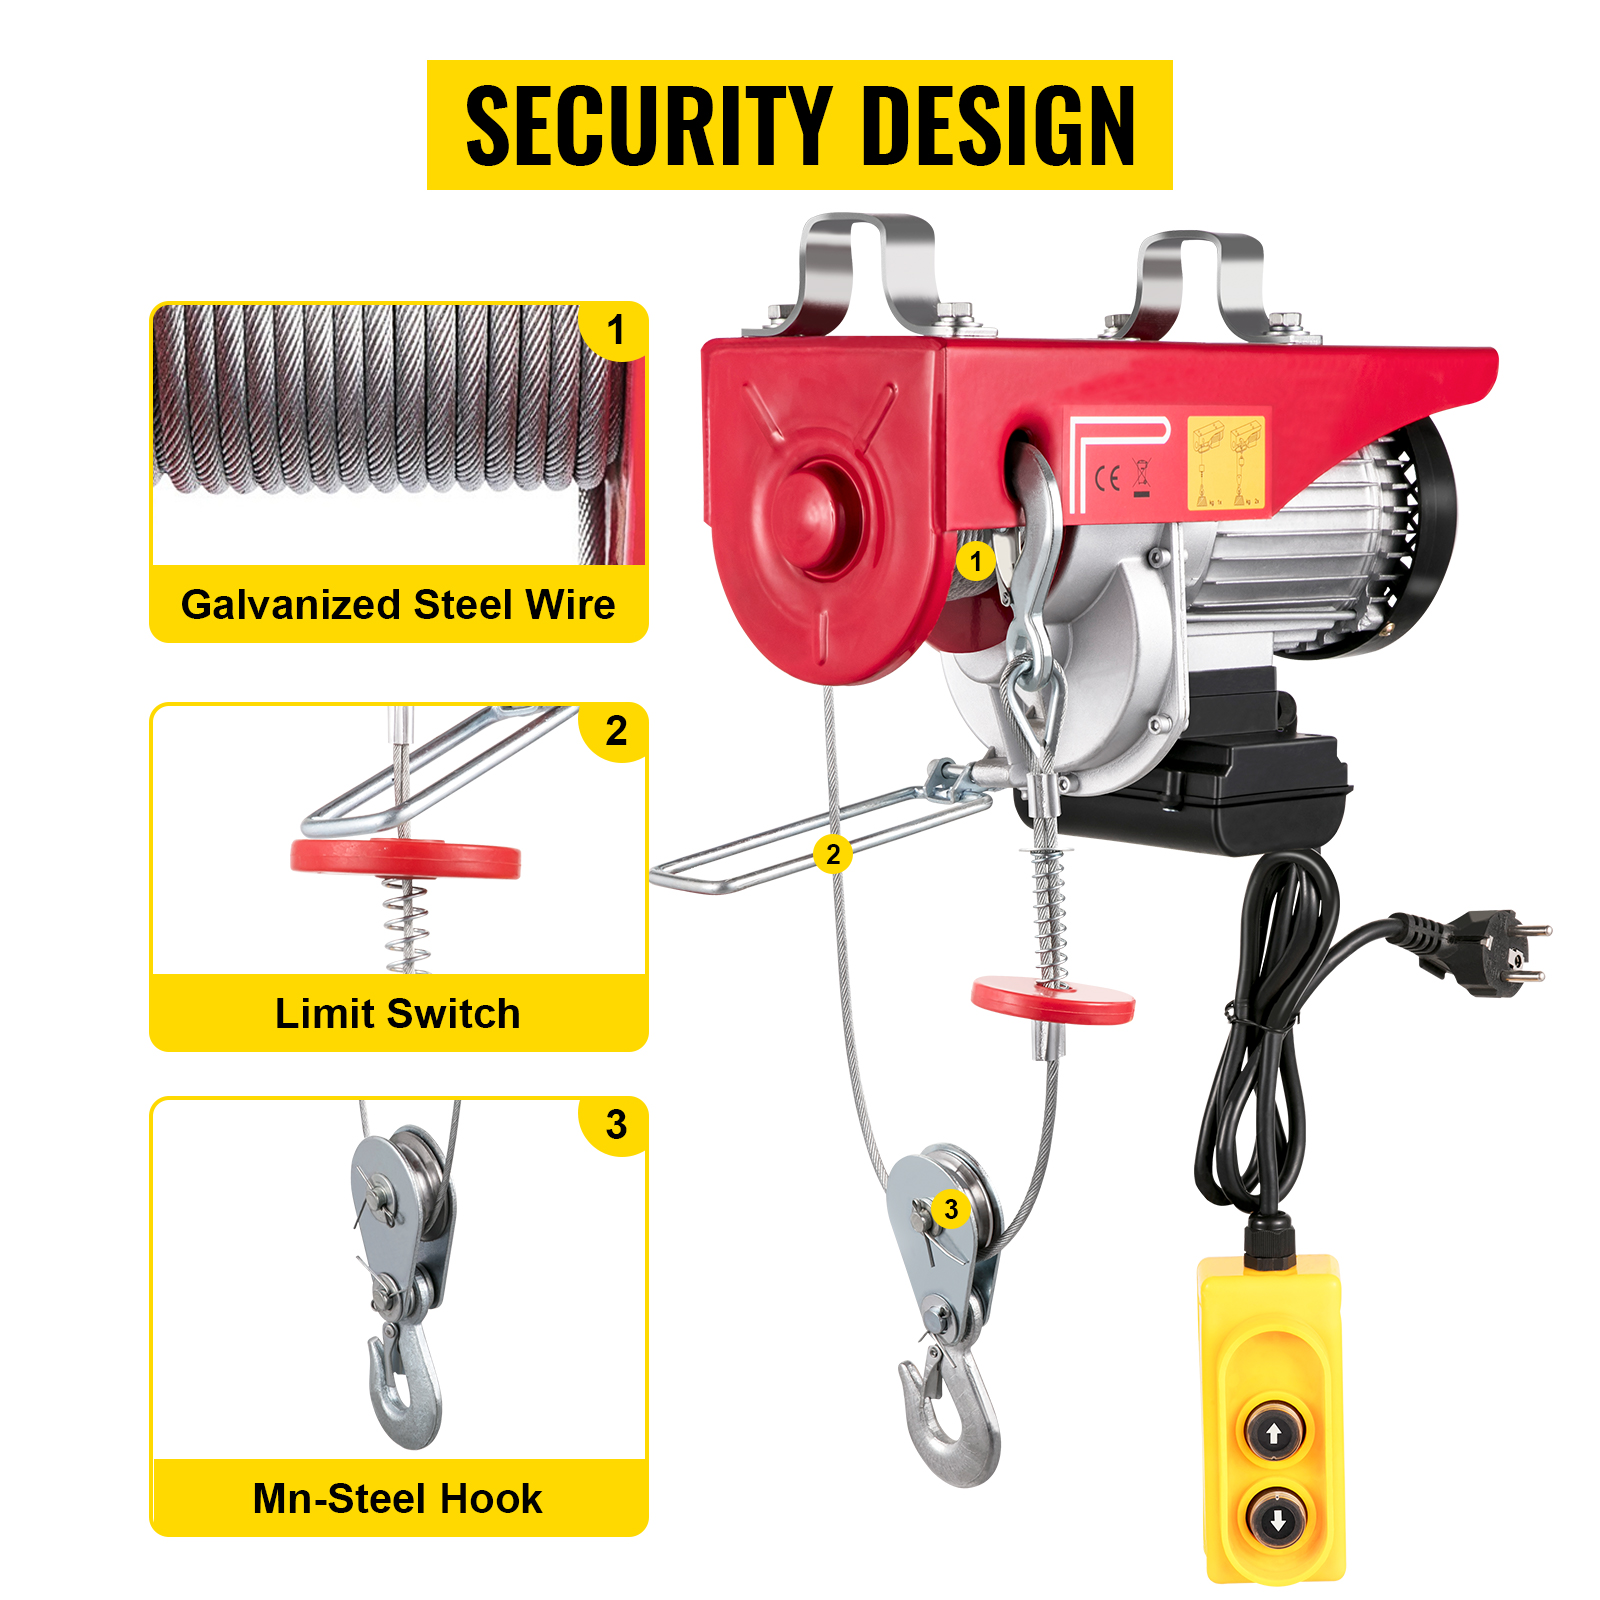 Bundle Items w/Emergency Stop Switch Partsam 1760 lbs Lift Electric Hoist Crane Remote Control Overhead Crane Garage Ceiling Pulley Winch Bundled with Towing Strap 12Feet x 2inch 